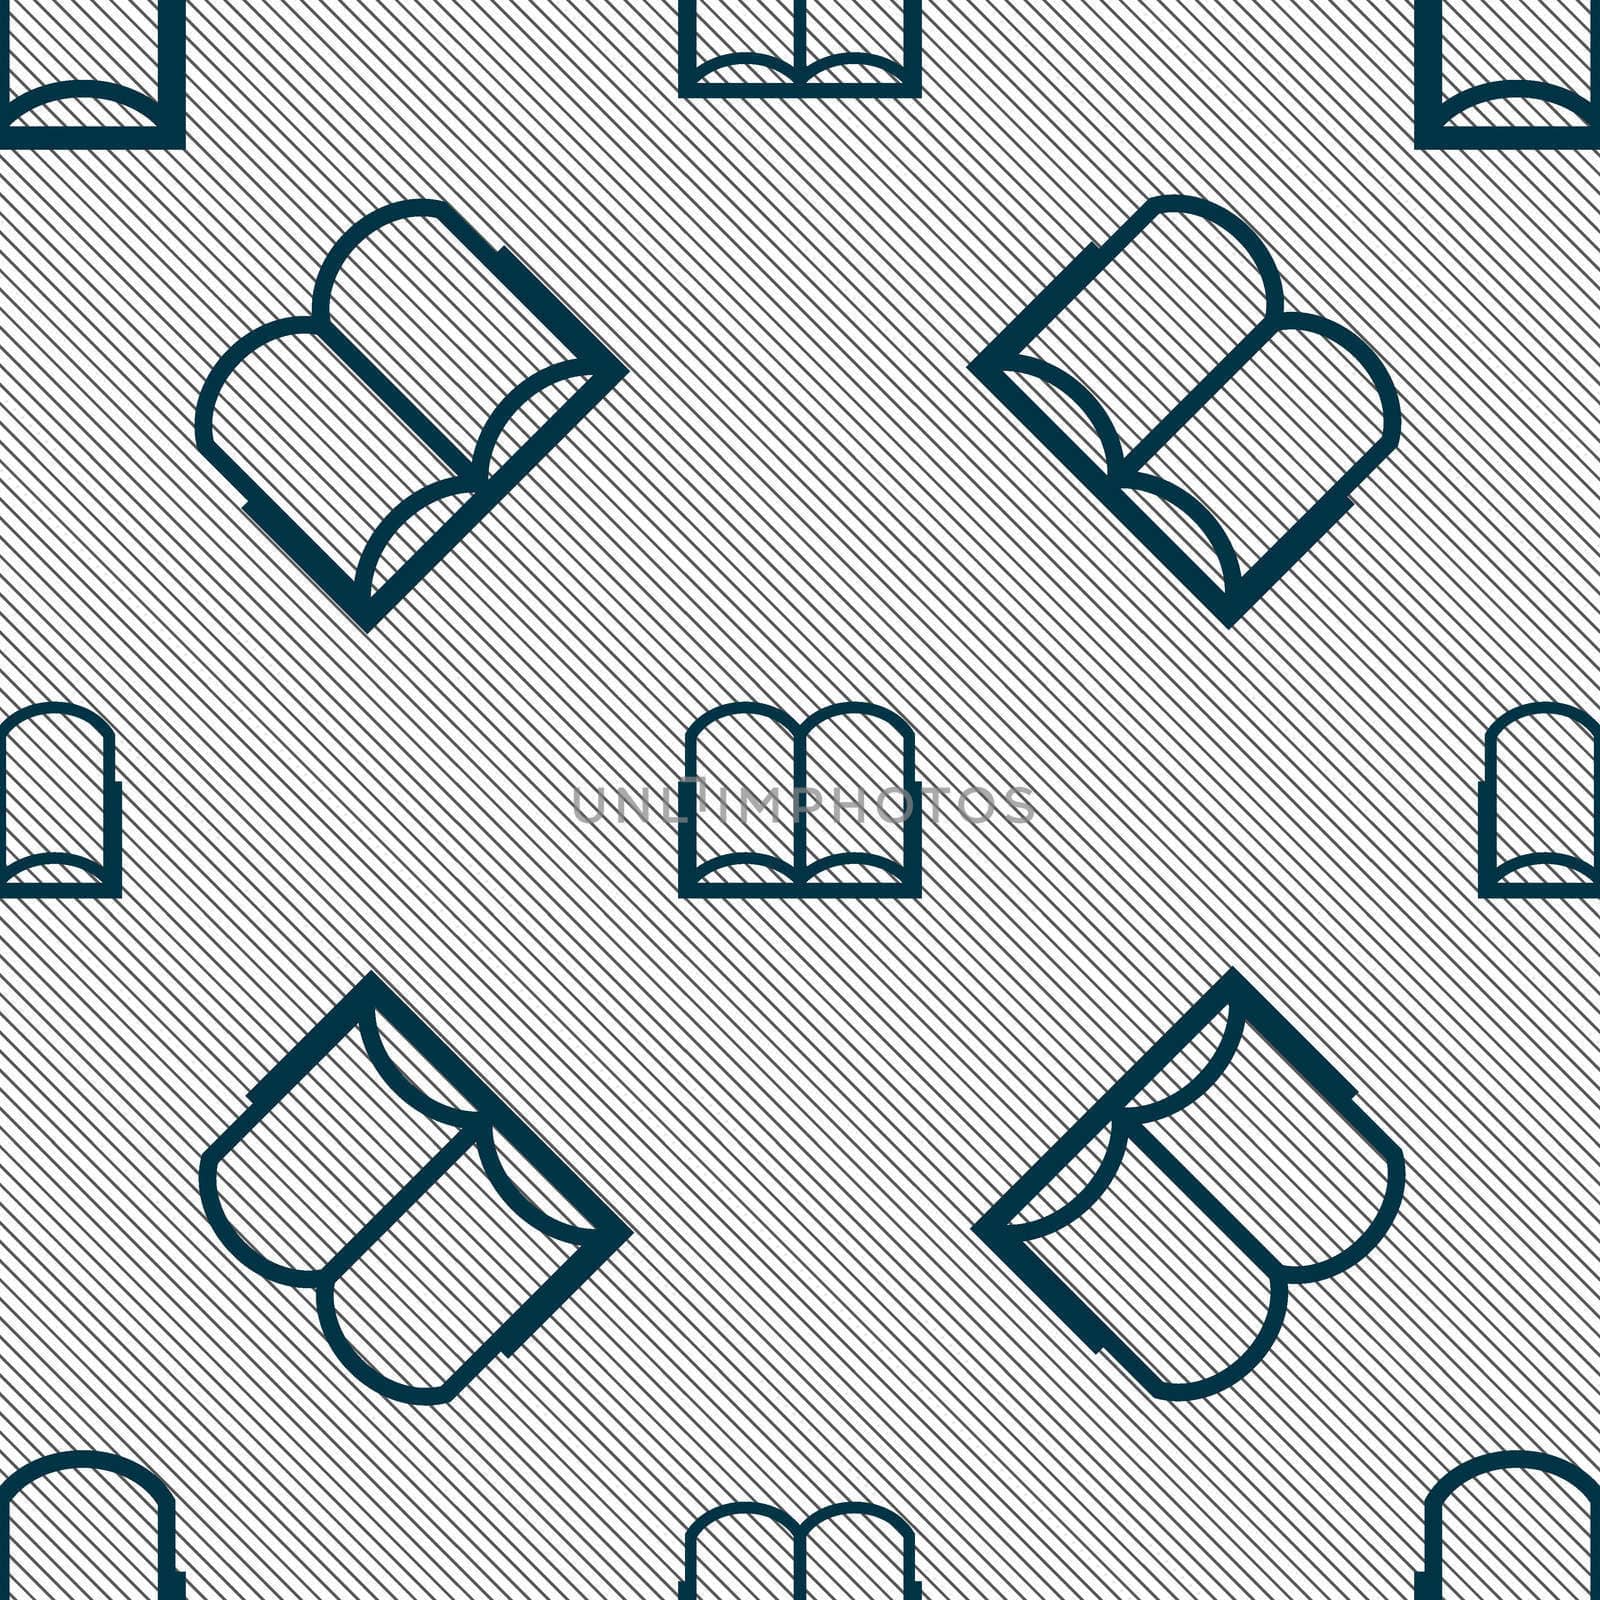 Book sign icon. Open book symbol. Seamless pattern with geometric texture.  by serhii_lohvyniuk